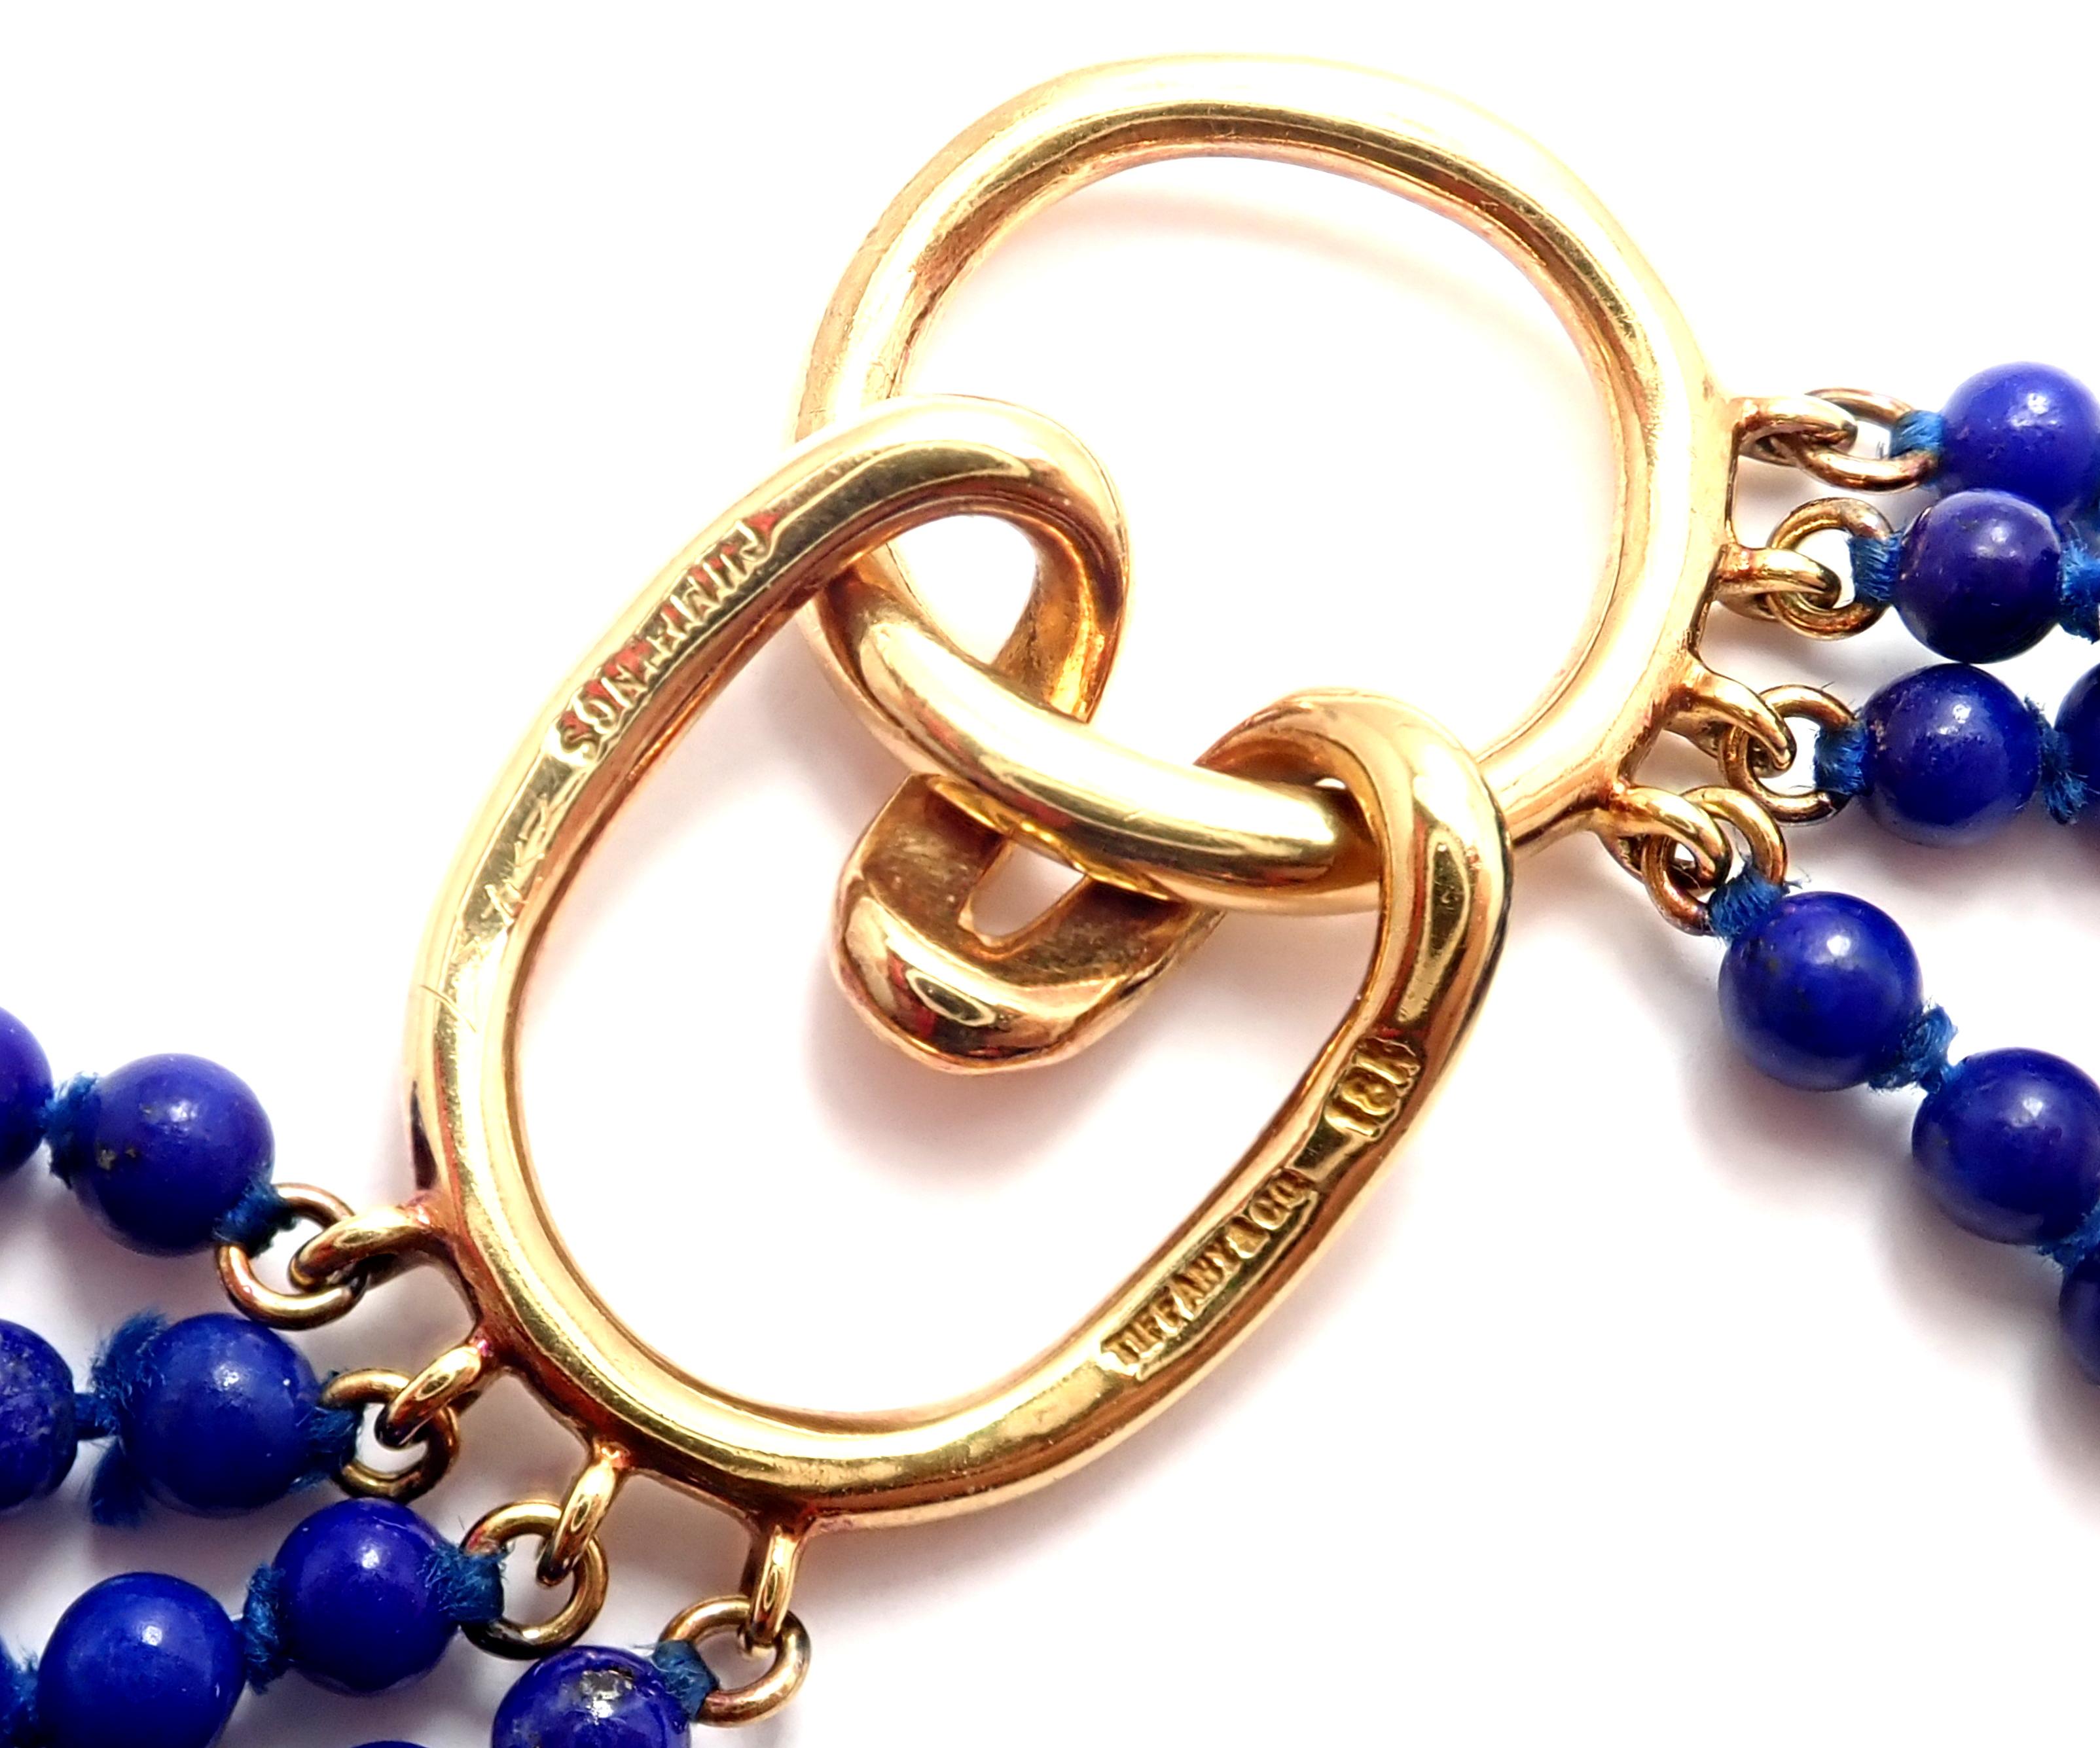 18k yellow gold Lapis Lazuli Choker Necklace by Angela Cummings for Tiffany & Co.
With Lapis Lazuli beads.
Metal: 18k yellow gold
Length: 13 inches
Weight: 26.3 grams
Width: 15mm
Hallmarks: Tiffany & Co Cummings 18k
YOUR PRICE: $2,900
T2466mtdd